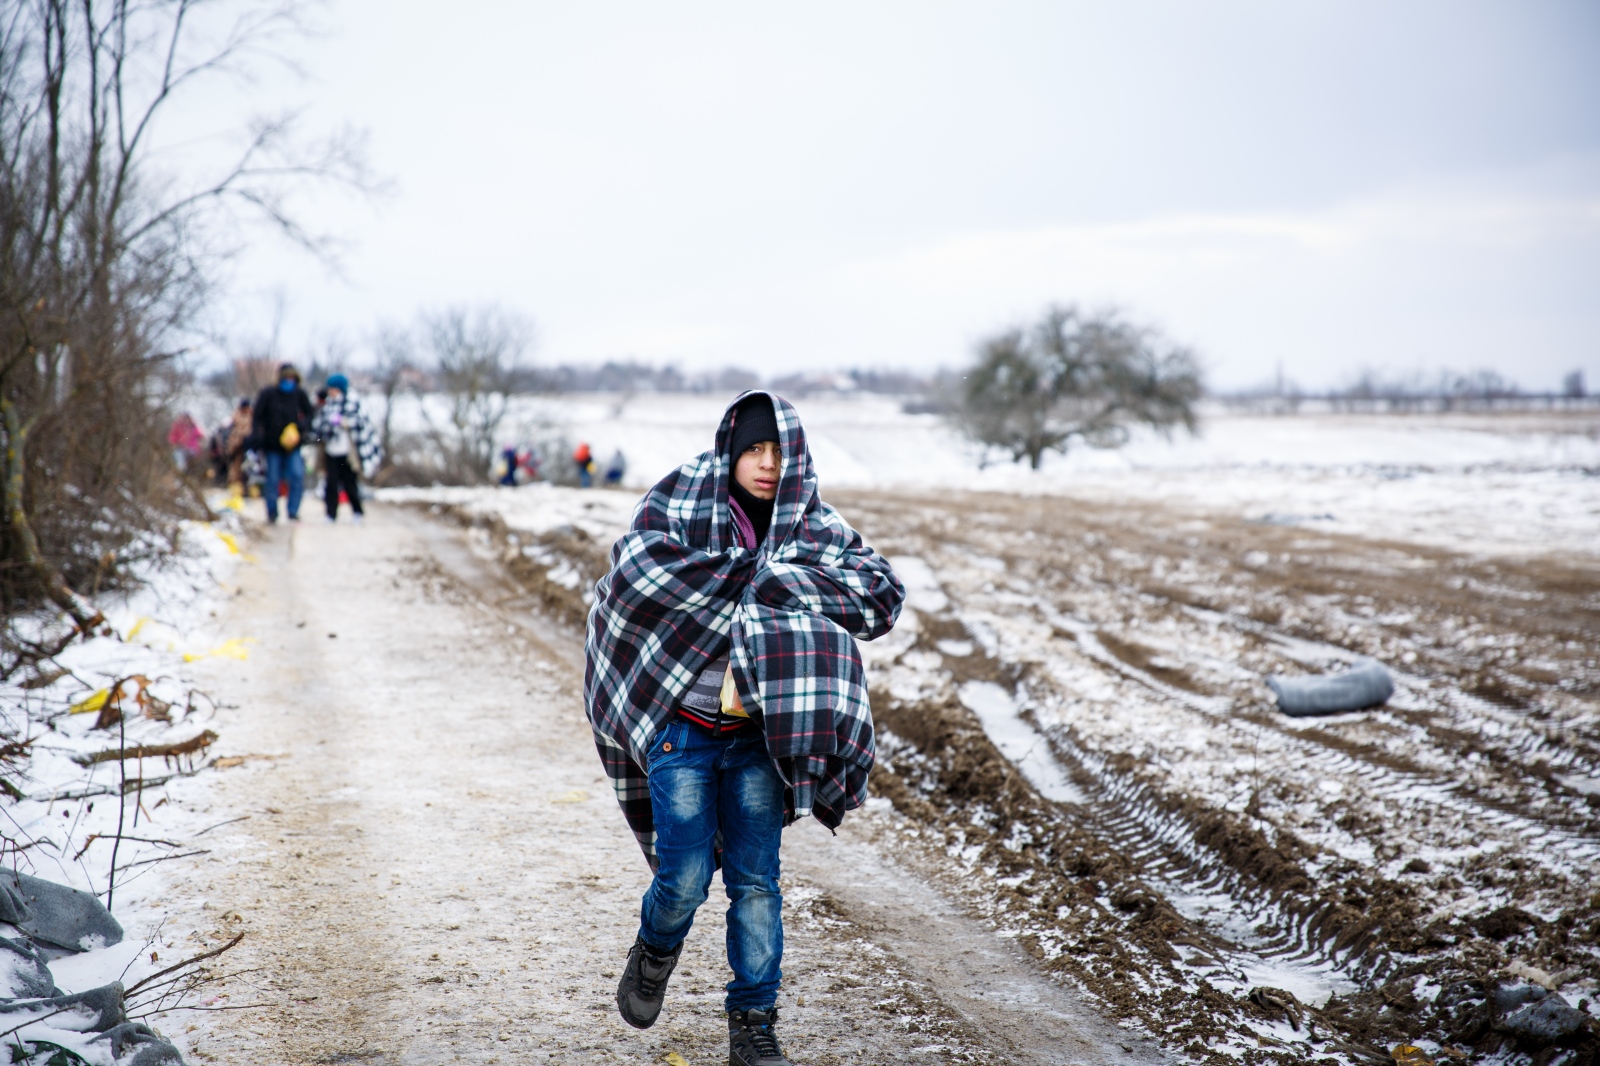 Crossing Serbia - In subfreezing snowy weather, a refugee child walks the...